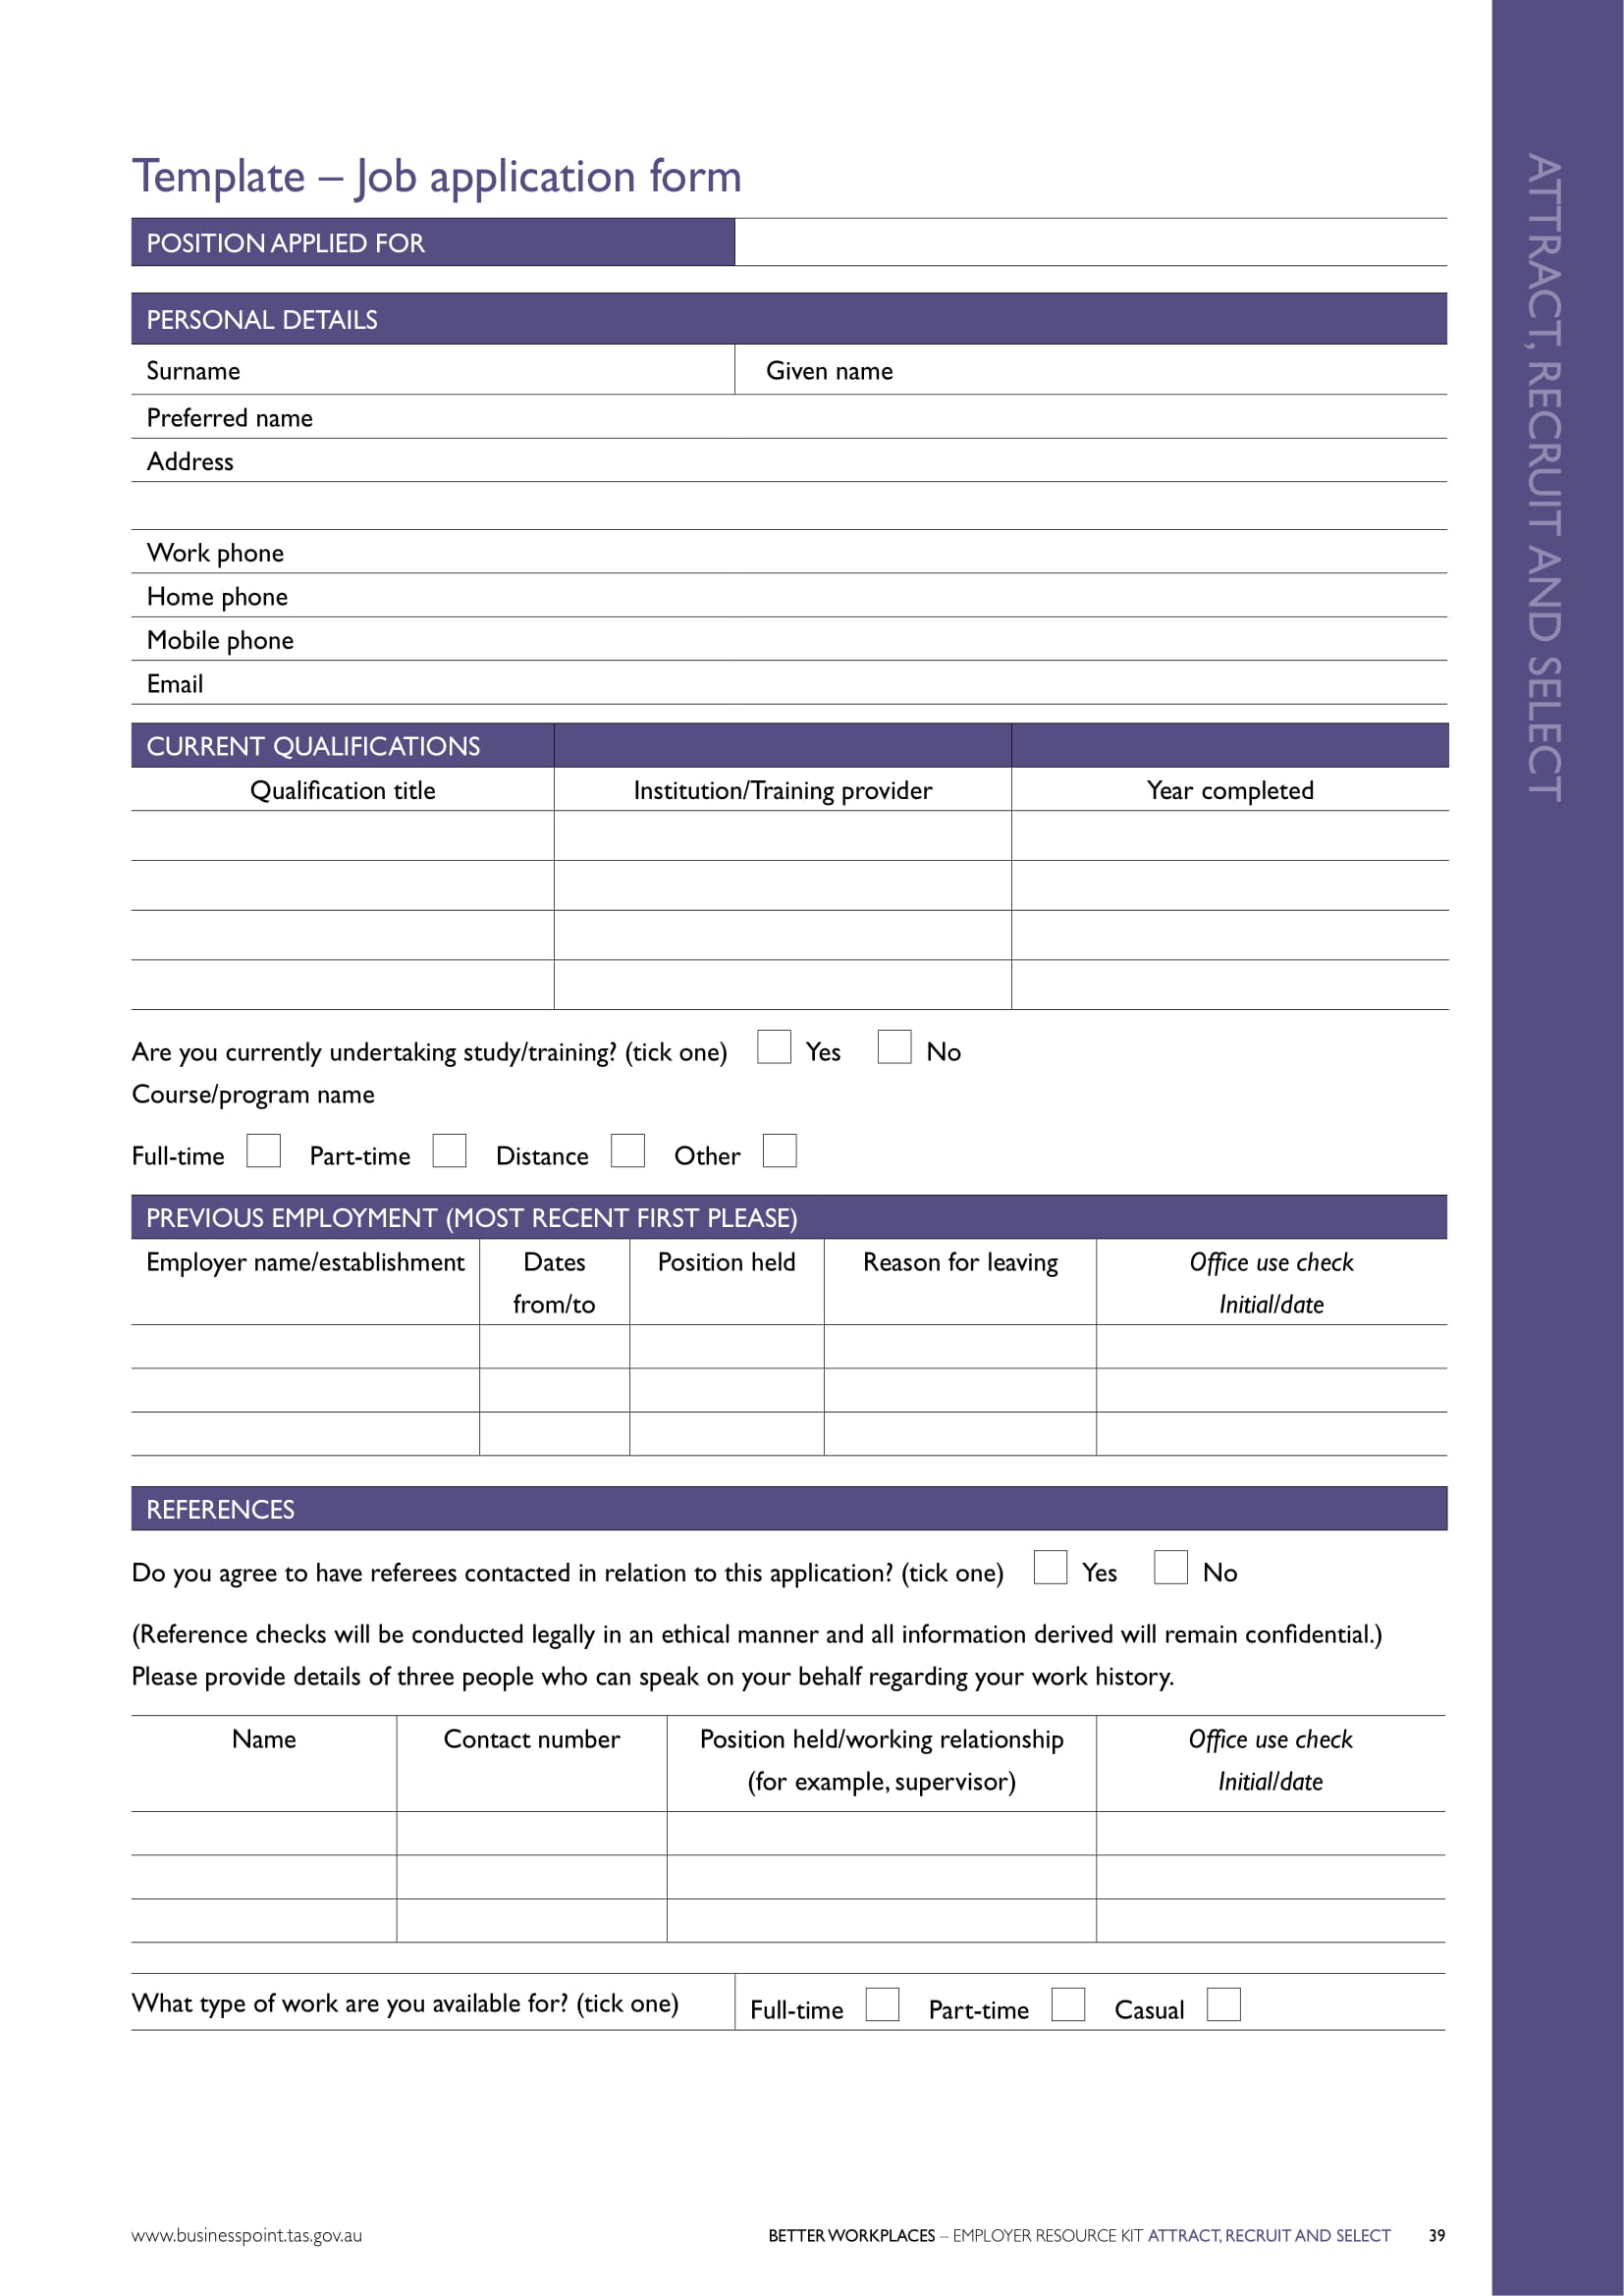 job application form template example